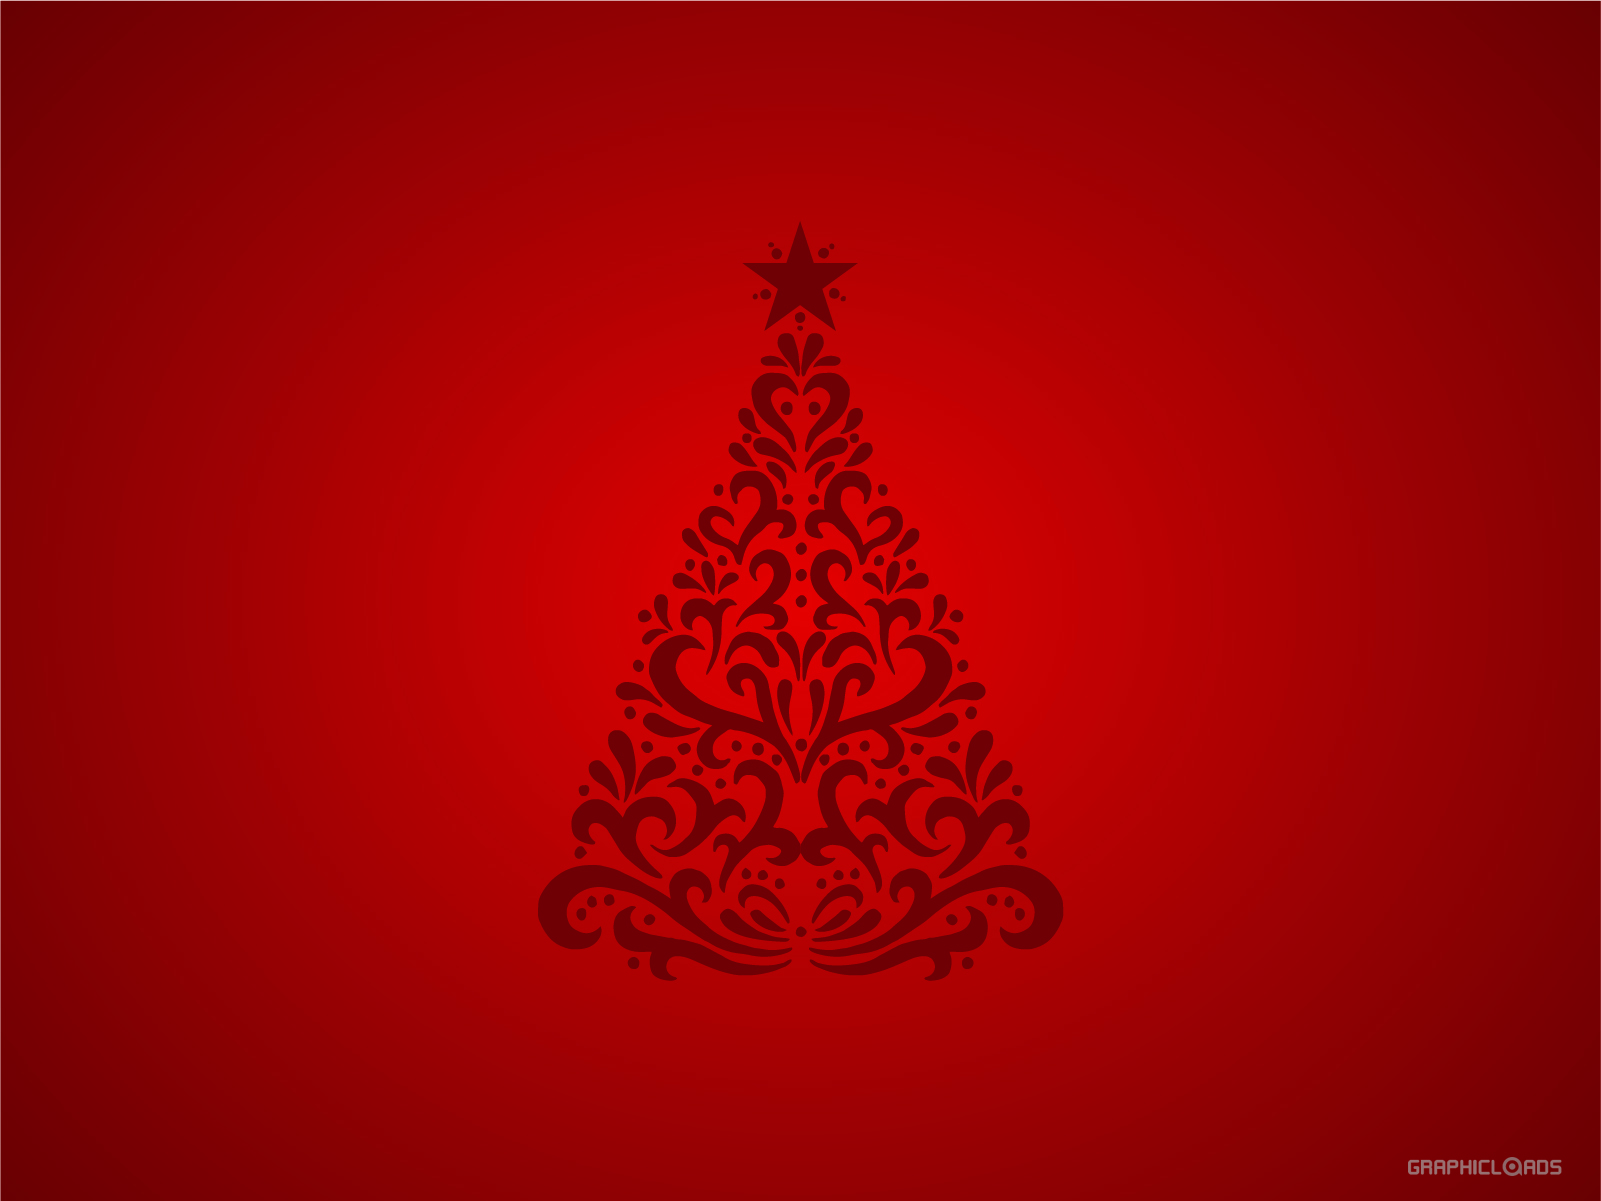  High Quality Christmas Wallpapers GraphicLoads